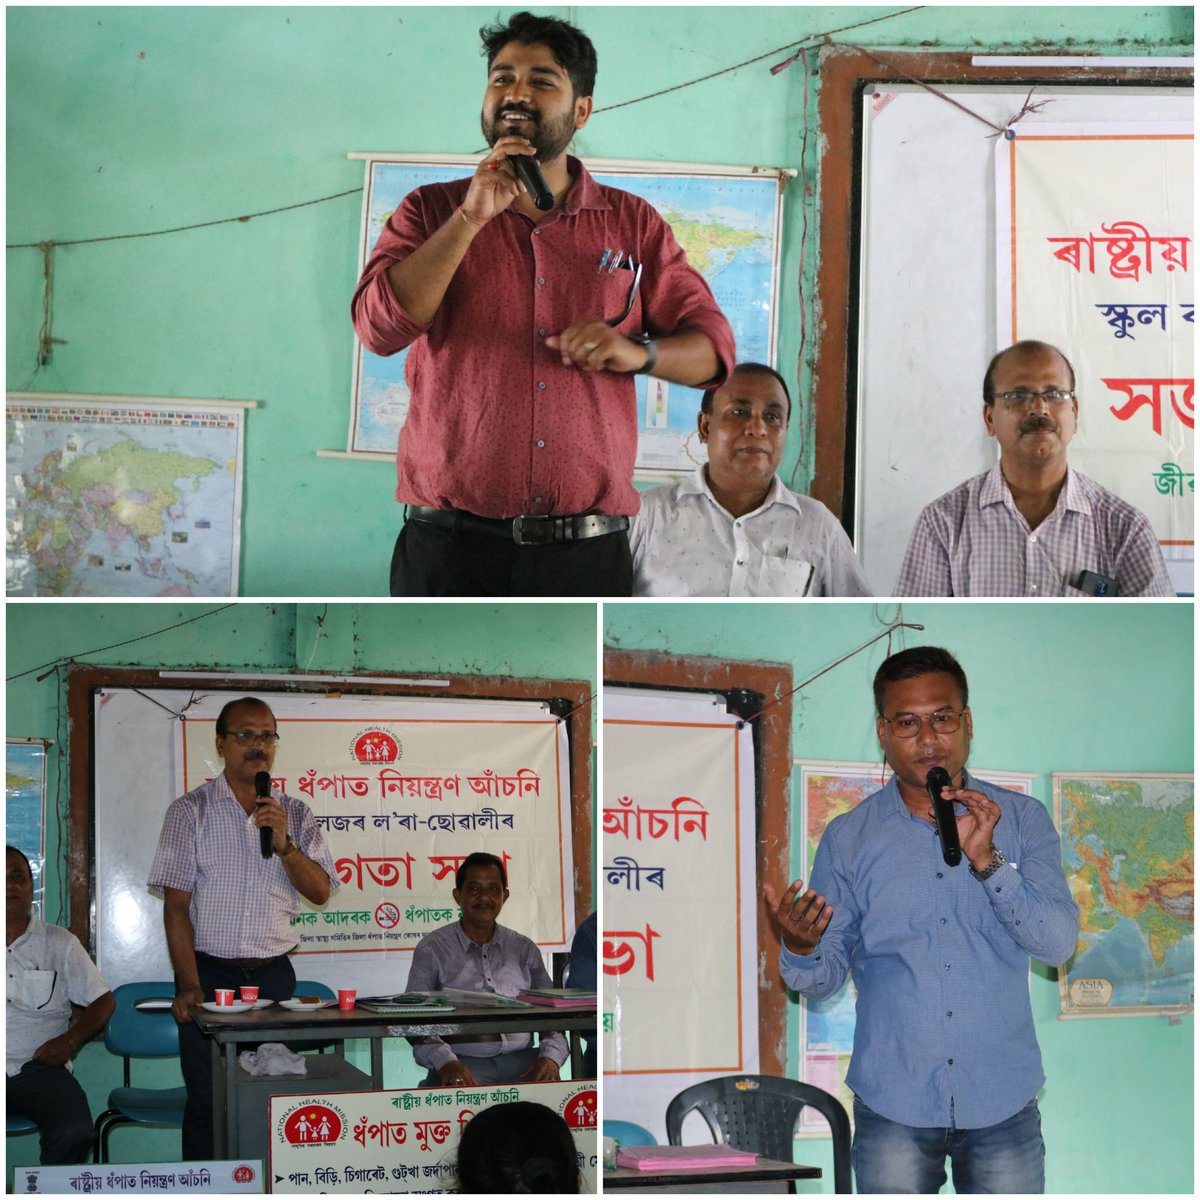 Saying no to tobacco is saying yes to life. Stay healthy and happy with no tobacco. Awareness meeting on Anti-tobacco was held at Raghunath Choudhary Higher Secondary School under Mukalmua BPHC of Nalbari District.

@nhm_assam @MoHFW_INDIA